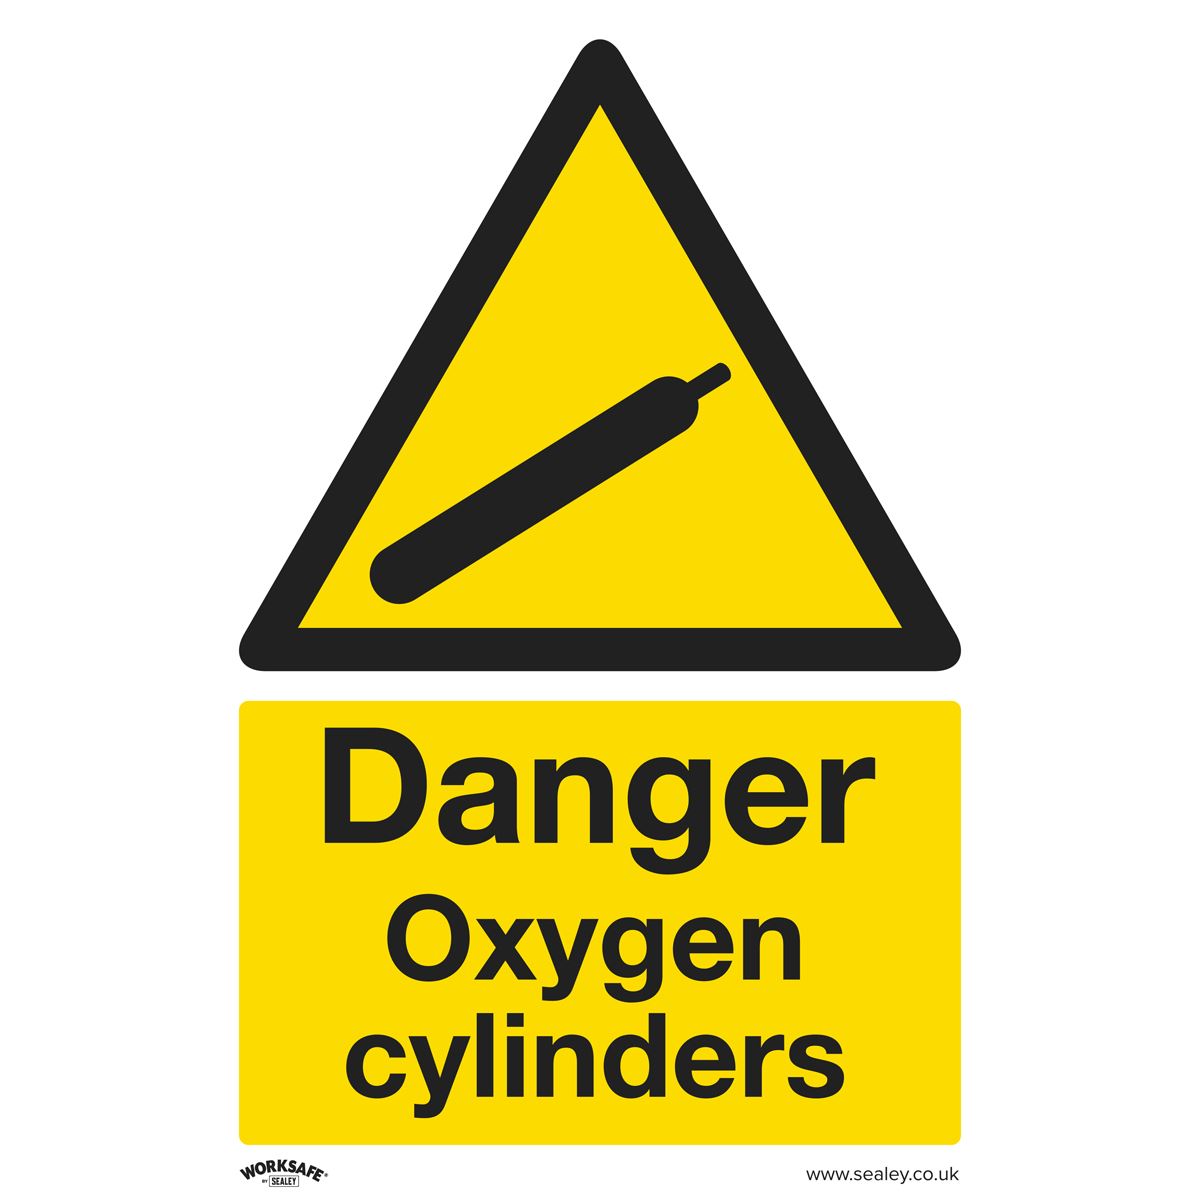 Worksafe by Sealey Danger Oxygen Cylinders - Warning Safety Sign - Self-Adhesive Vinyl